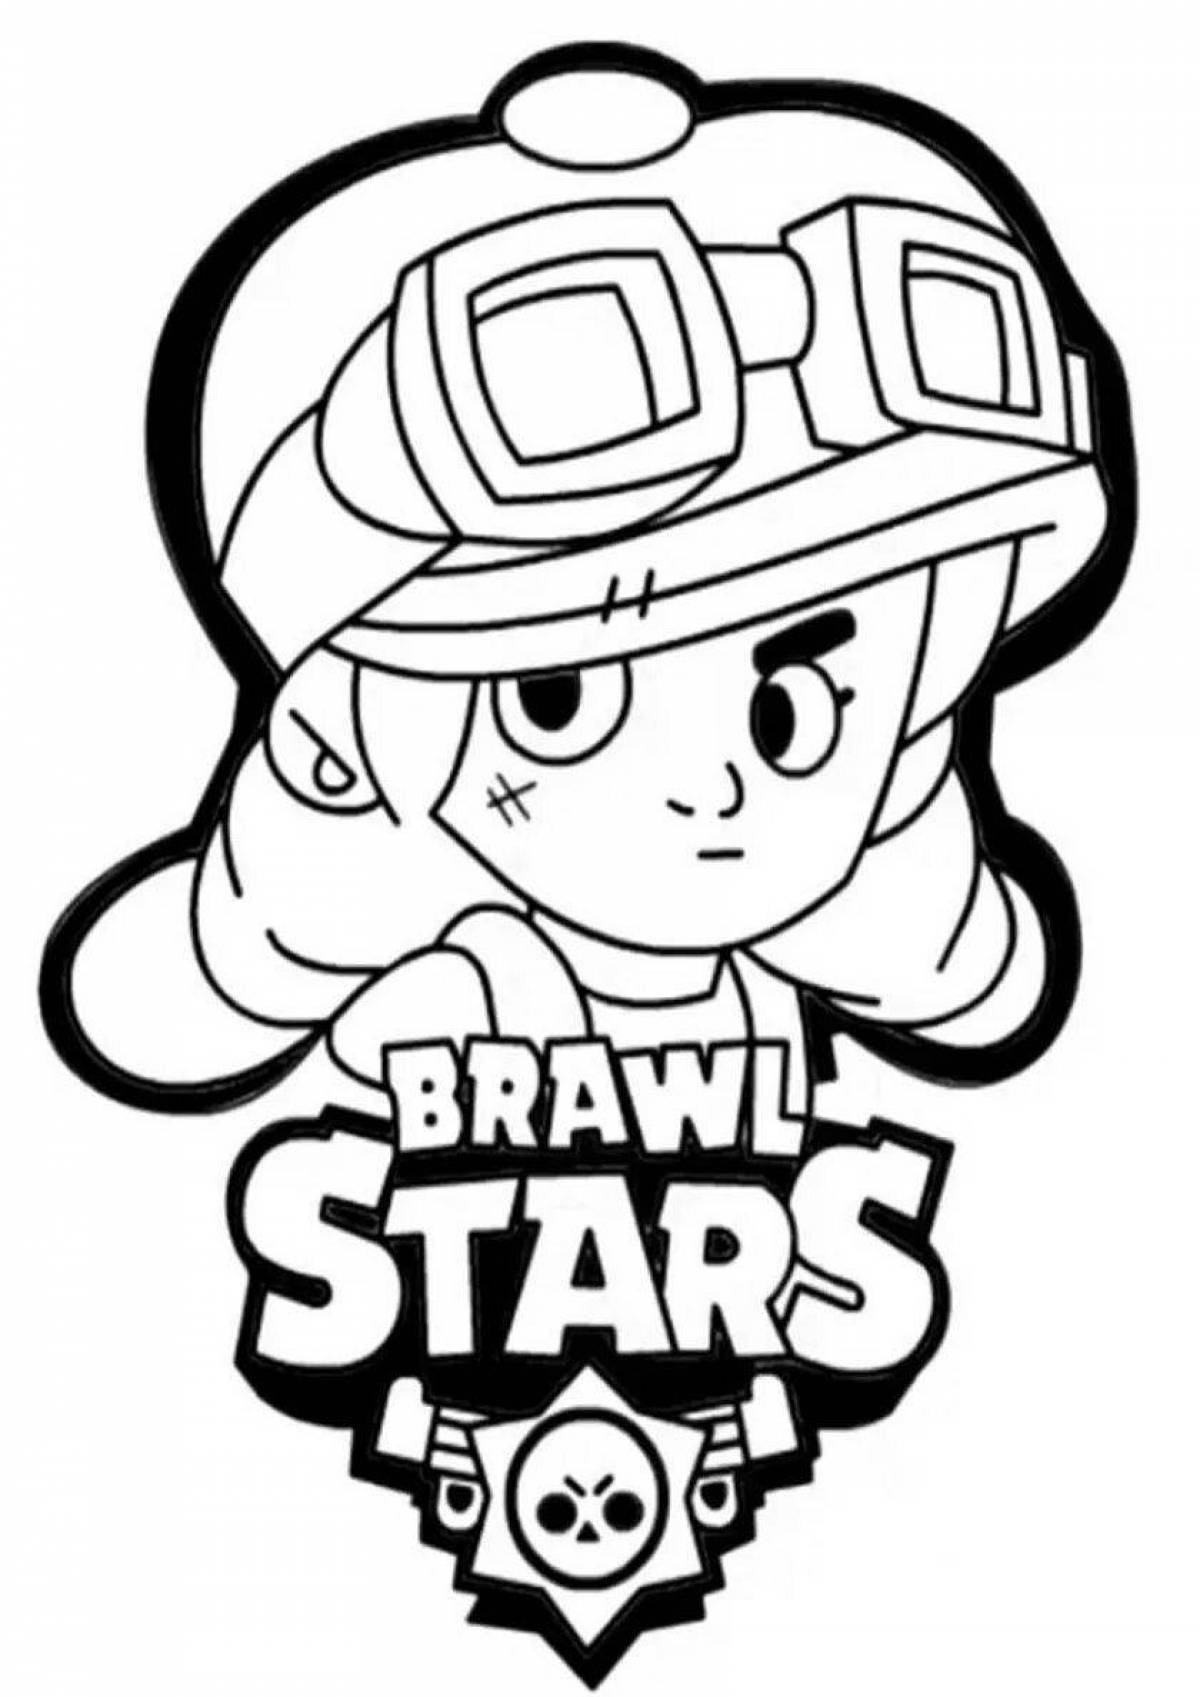 Awesome brow star coloring page